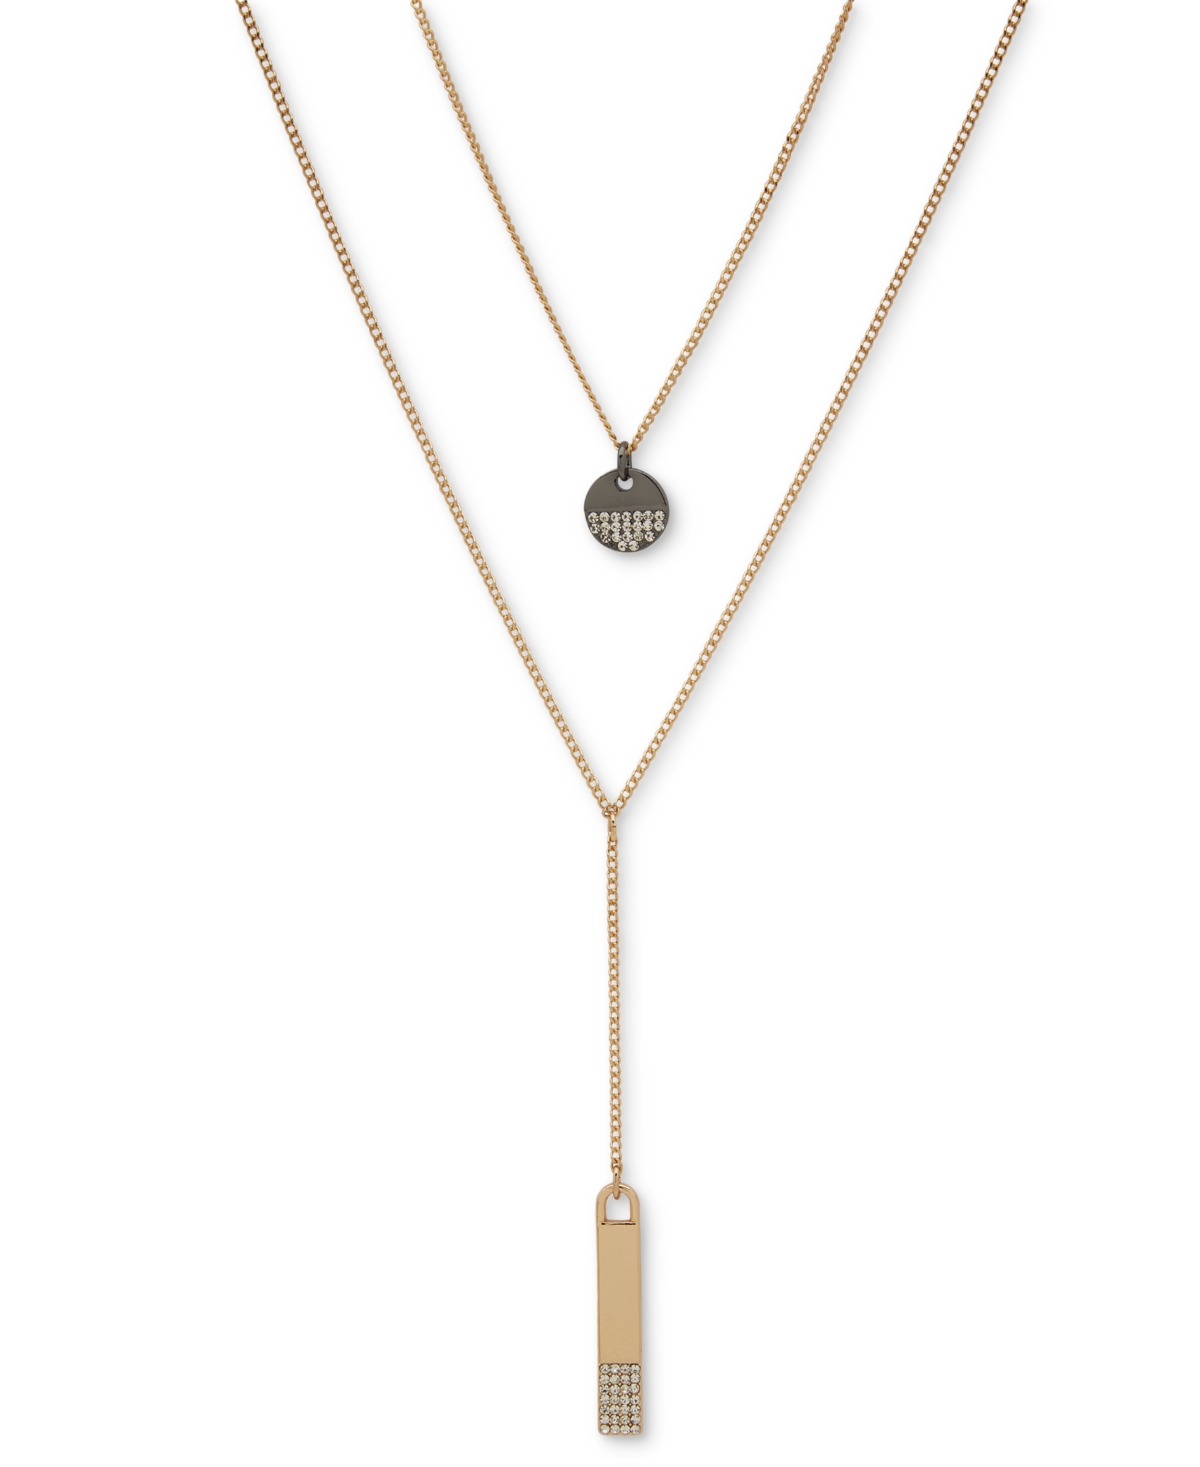 Dkny Two-tone Crystal Two-row Lariat Necklace, 16" + 3" Extender In White